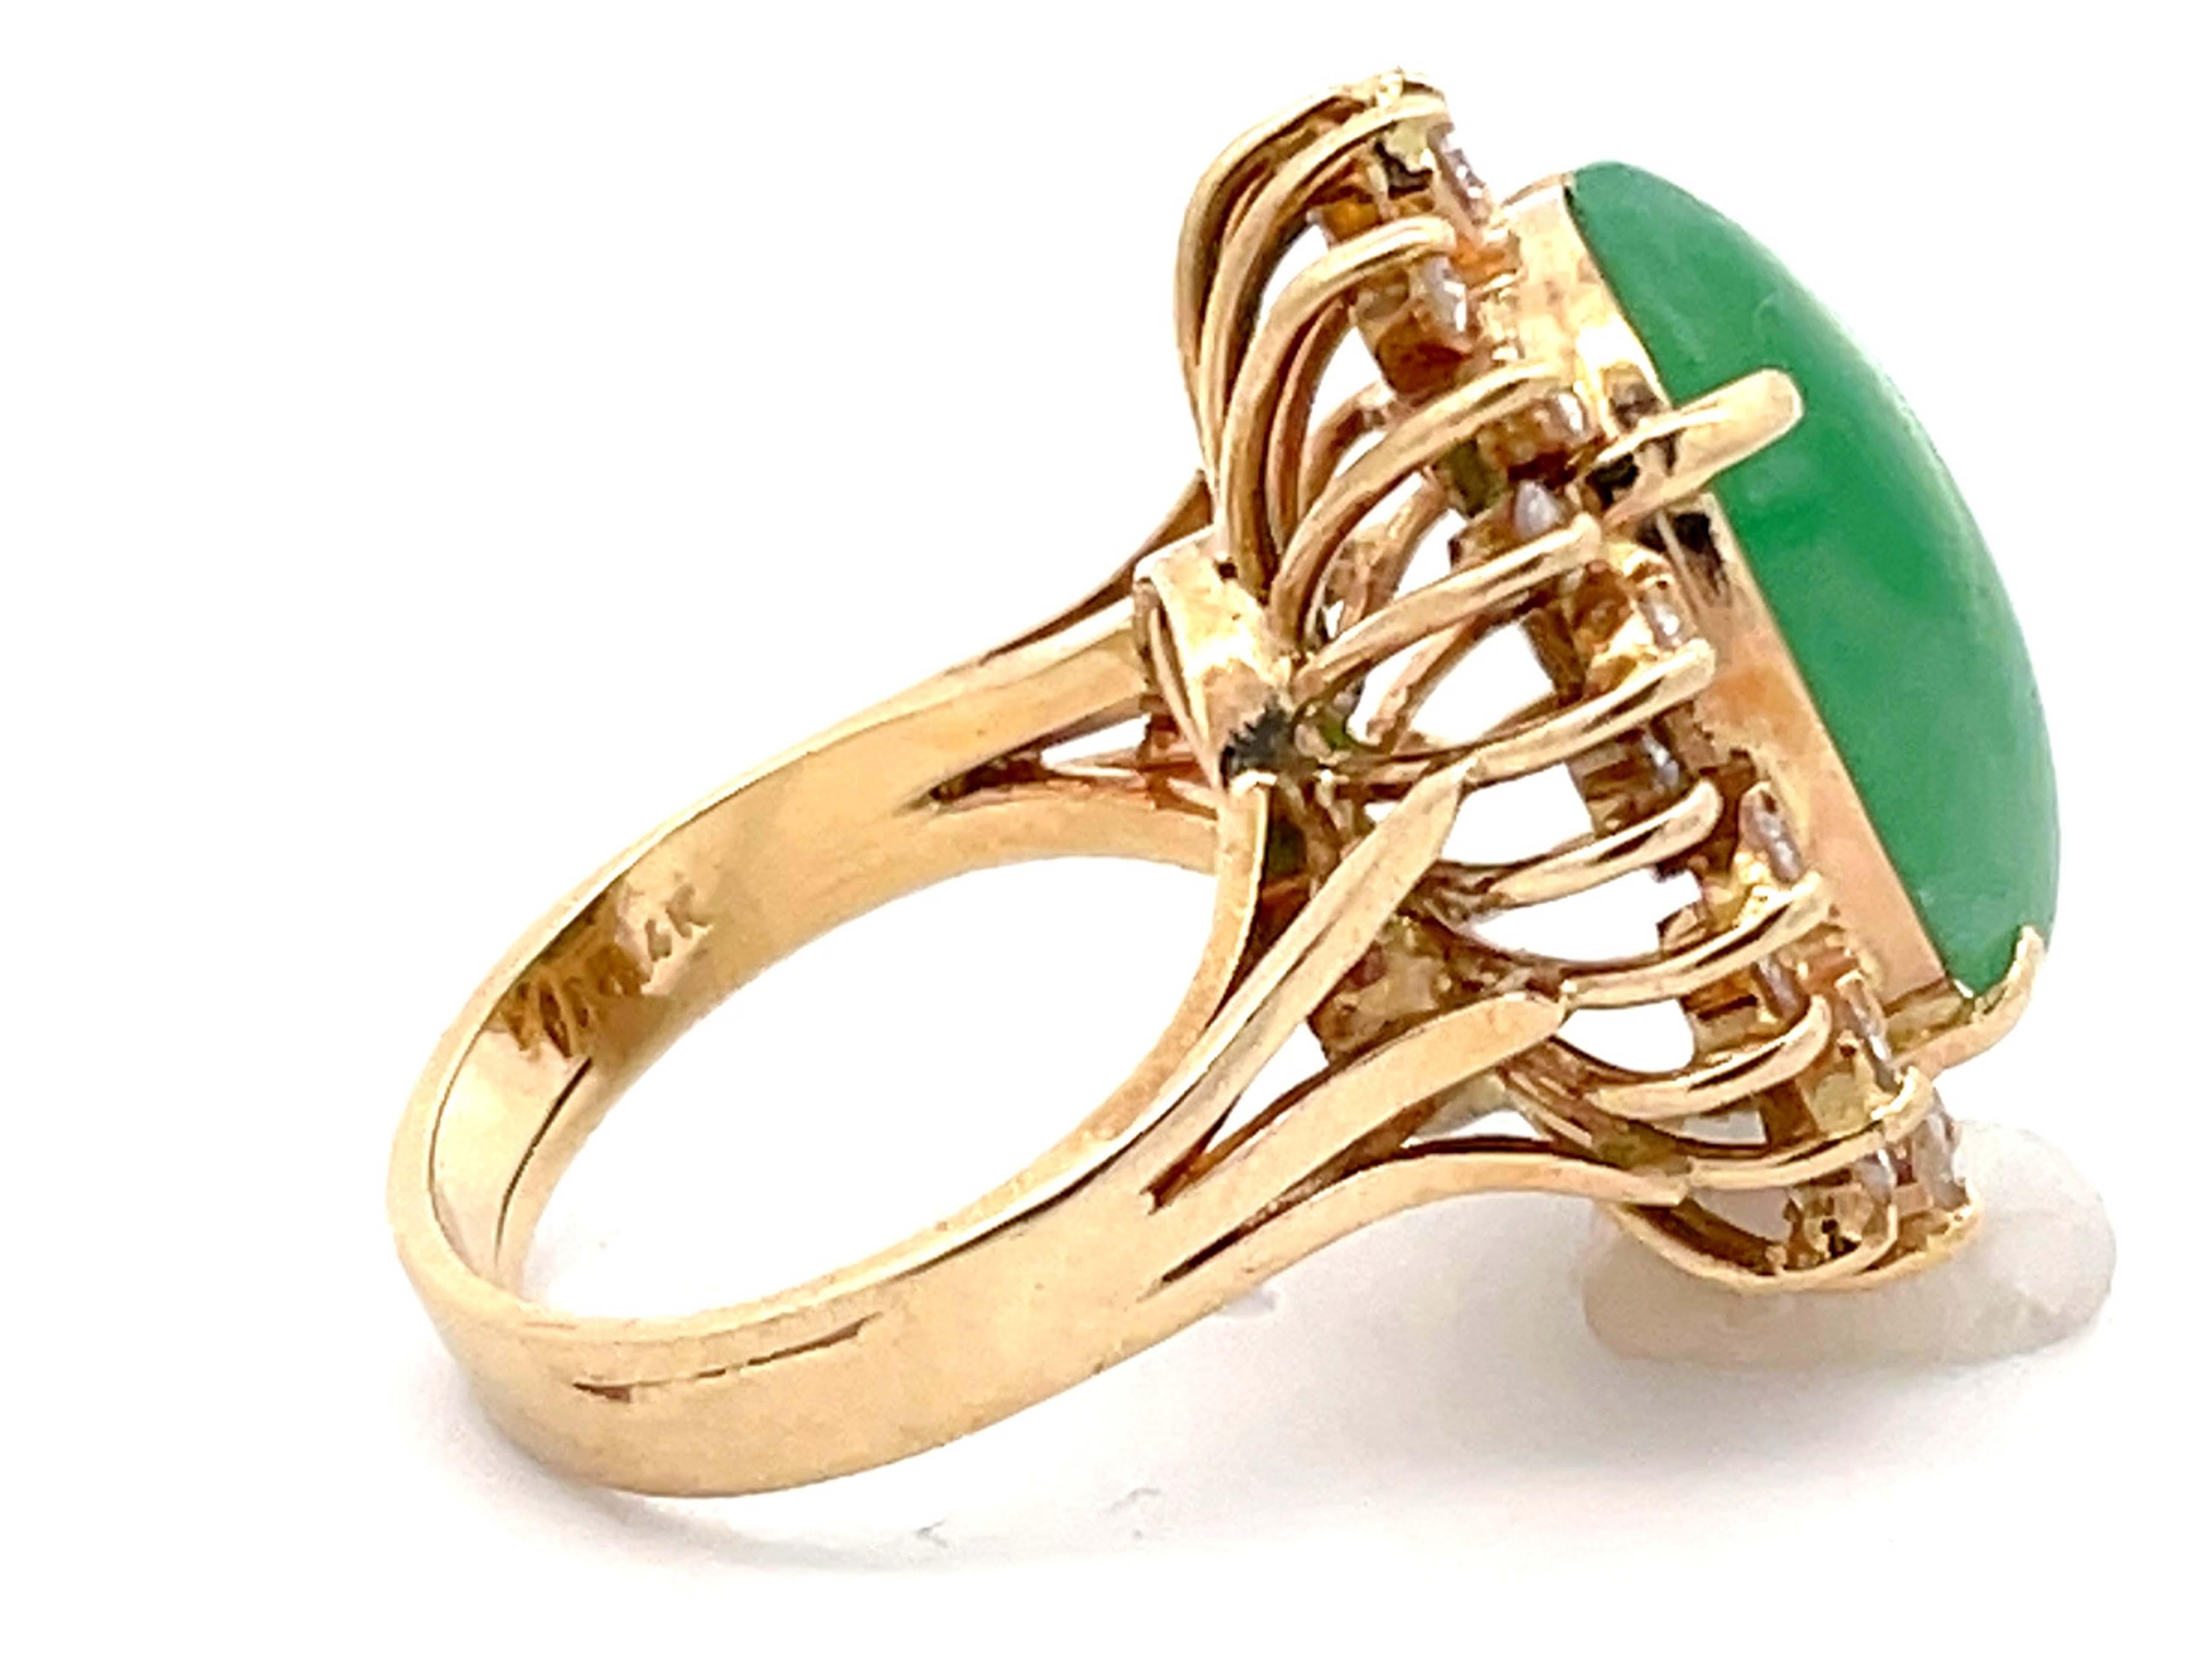 Diamond Halo Cabochon Jade Ring in 14k Yellow Gold In Excellent Condition For Sale In Honolulu, HI